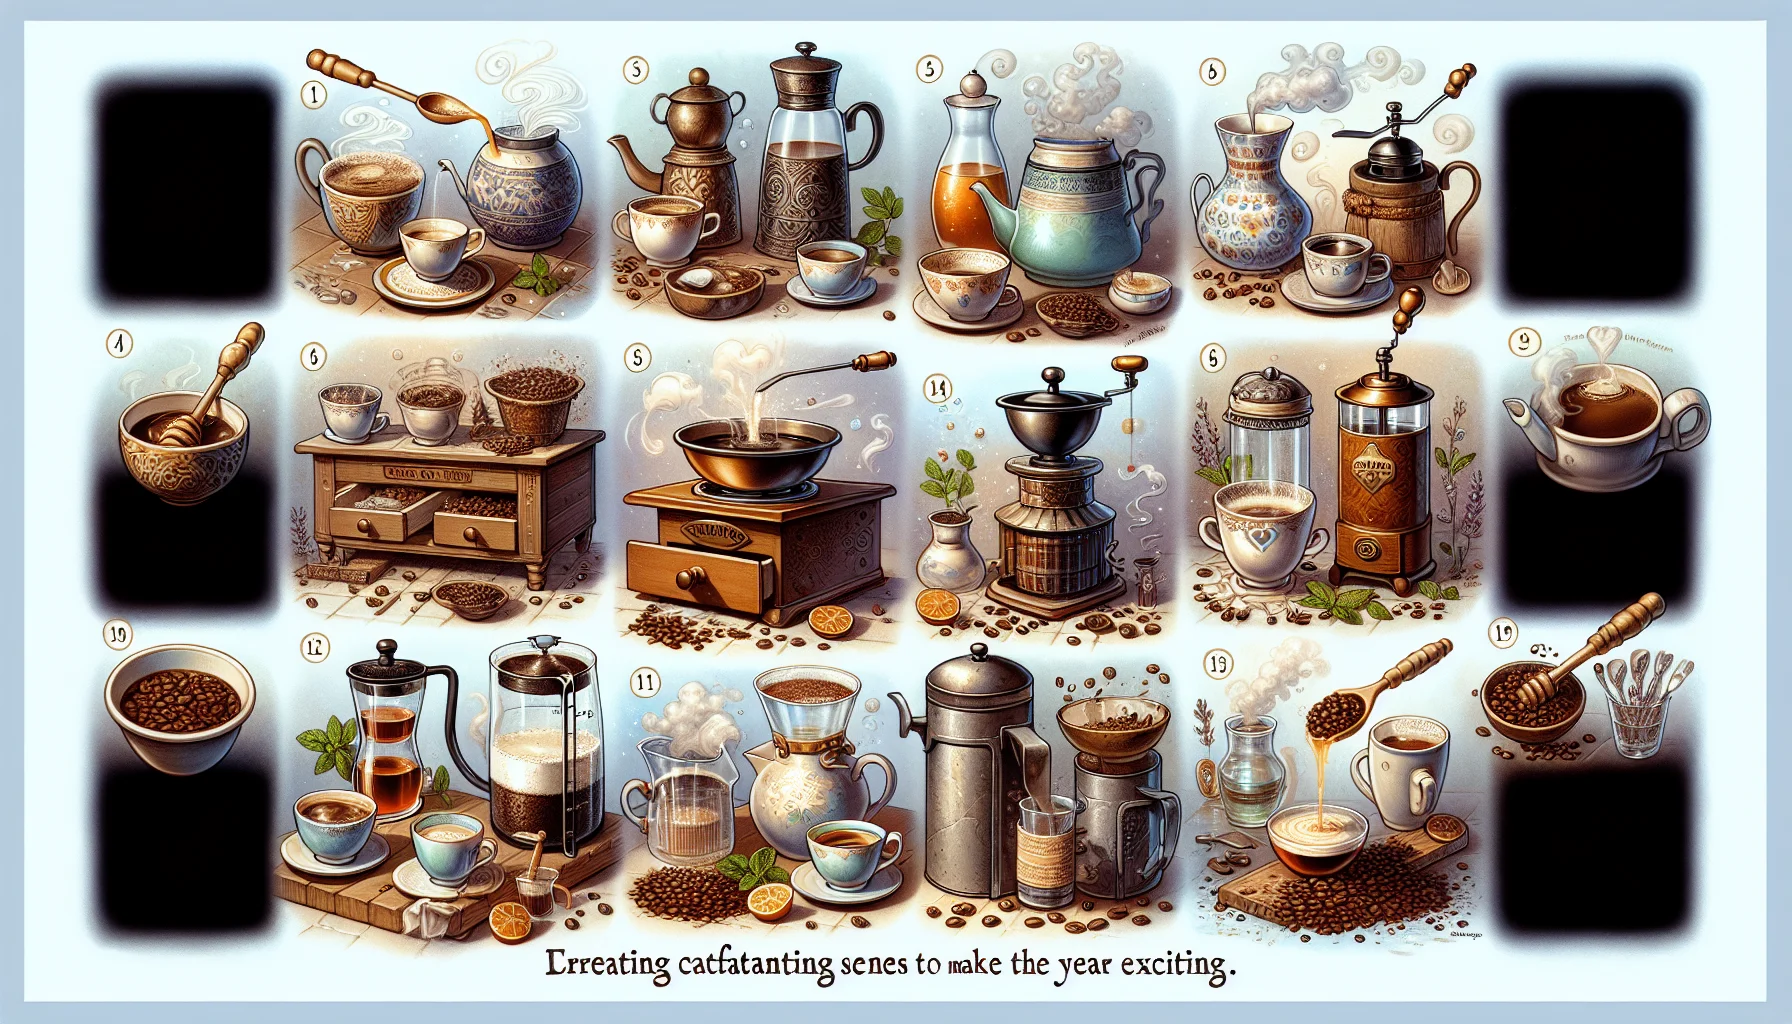 Create a whimsical and fascinating image illustrating fourteen captivating scenes related to brewing activities to make the year exciting. It includes heating the water on a vintage stove, scooping quaint ceramic pots with tea leaves, pouring frothy milk for coffee in a rustic jug, stirring honey into steaming mugs, grinding coffee beans with an antique hand-grinder, pressing coffee through a French press, selecting a tea from a well-stocked tea chest, arranging a tea set on a wooden tray, brewing Turkish coffee in a long-handled pot, cooling off iced-tea with slices of lemon and mint, trying out a new herbal tea blend, inspecting coffee beans for quality, and finally, enjoying a self-made brew under the afternoon sun. The sight should inspire delight in the art of brewing and consuming tea and coffee products.